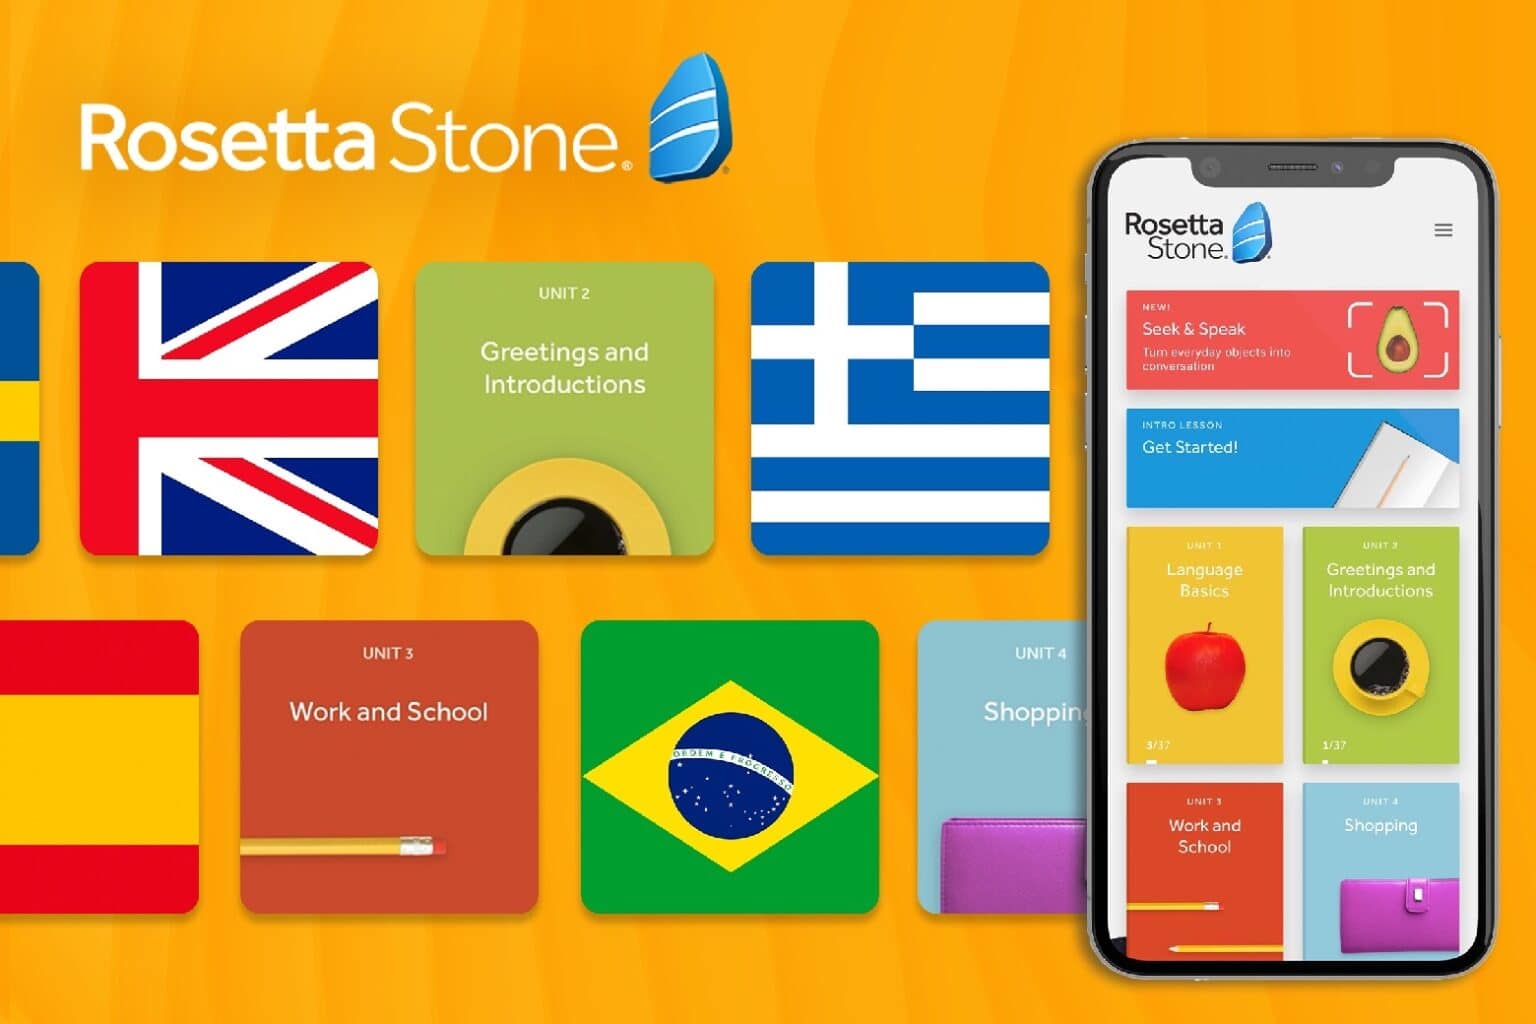 Gift Rosetta Stone this holiday season for only $159.97 .